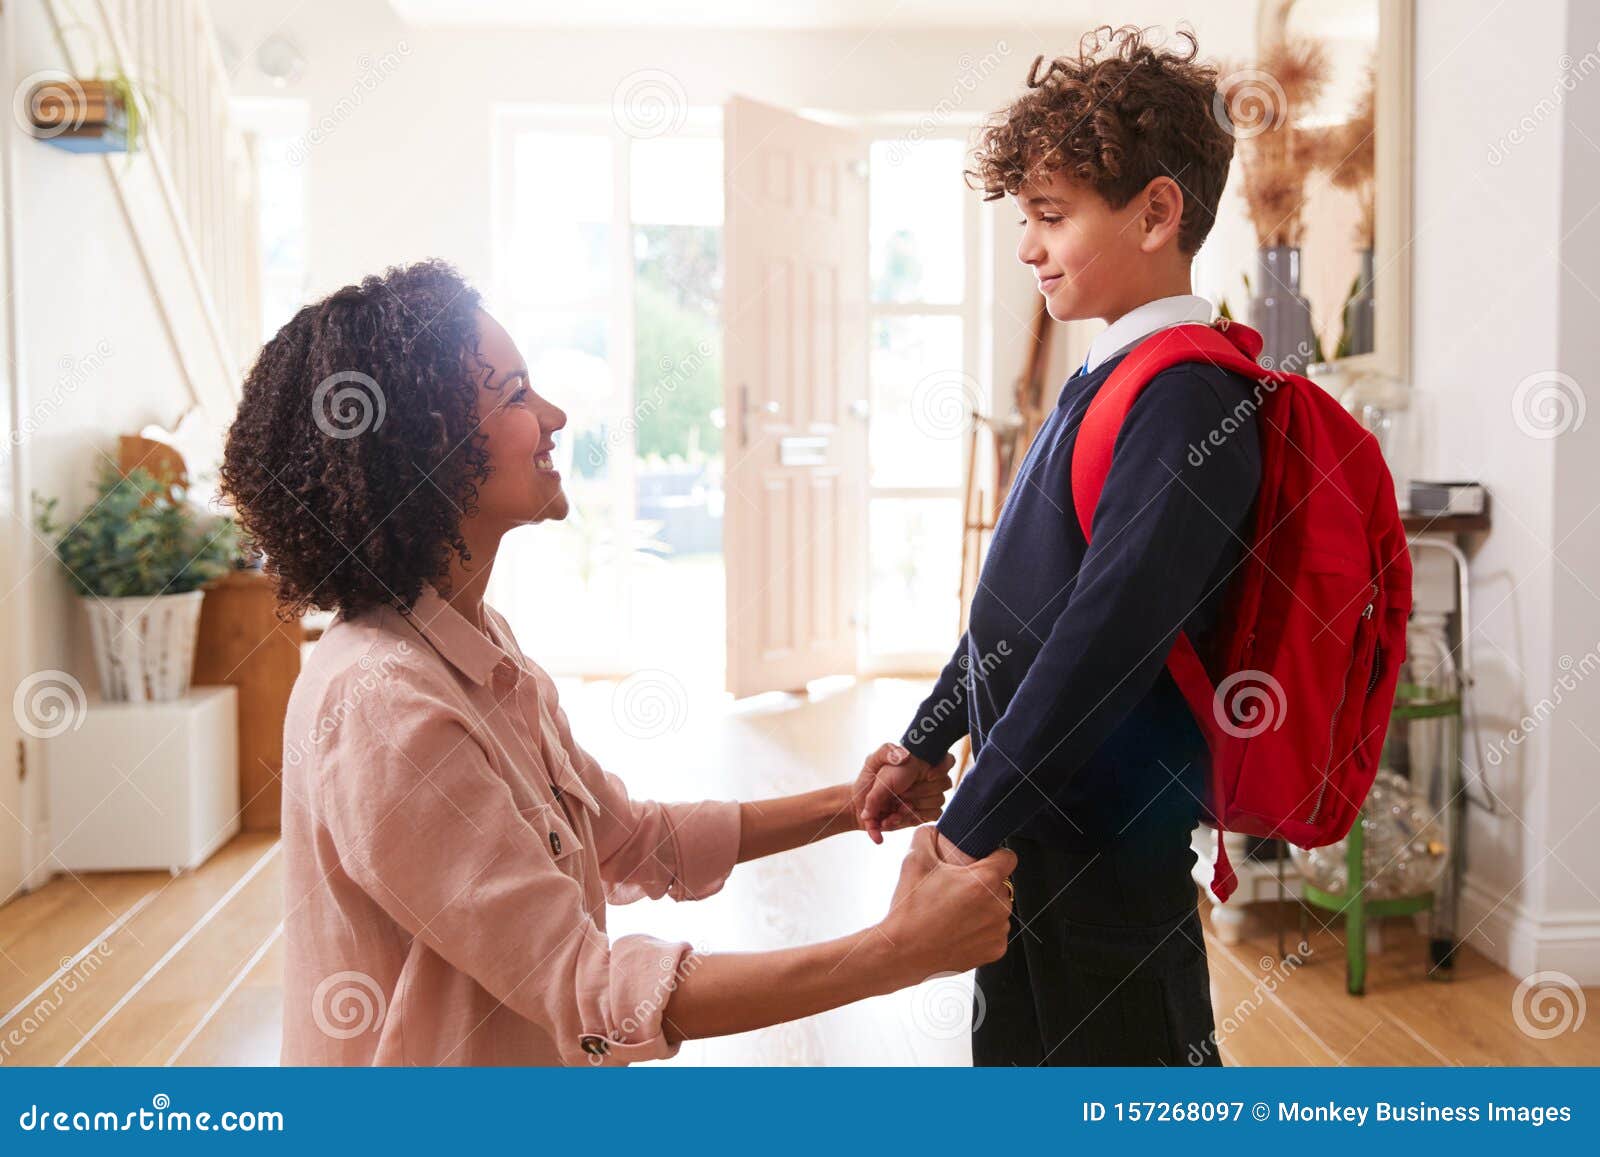 single mother at home getting son wearing uniform ready for first day of school